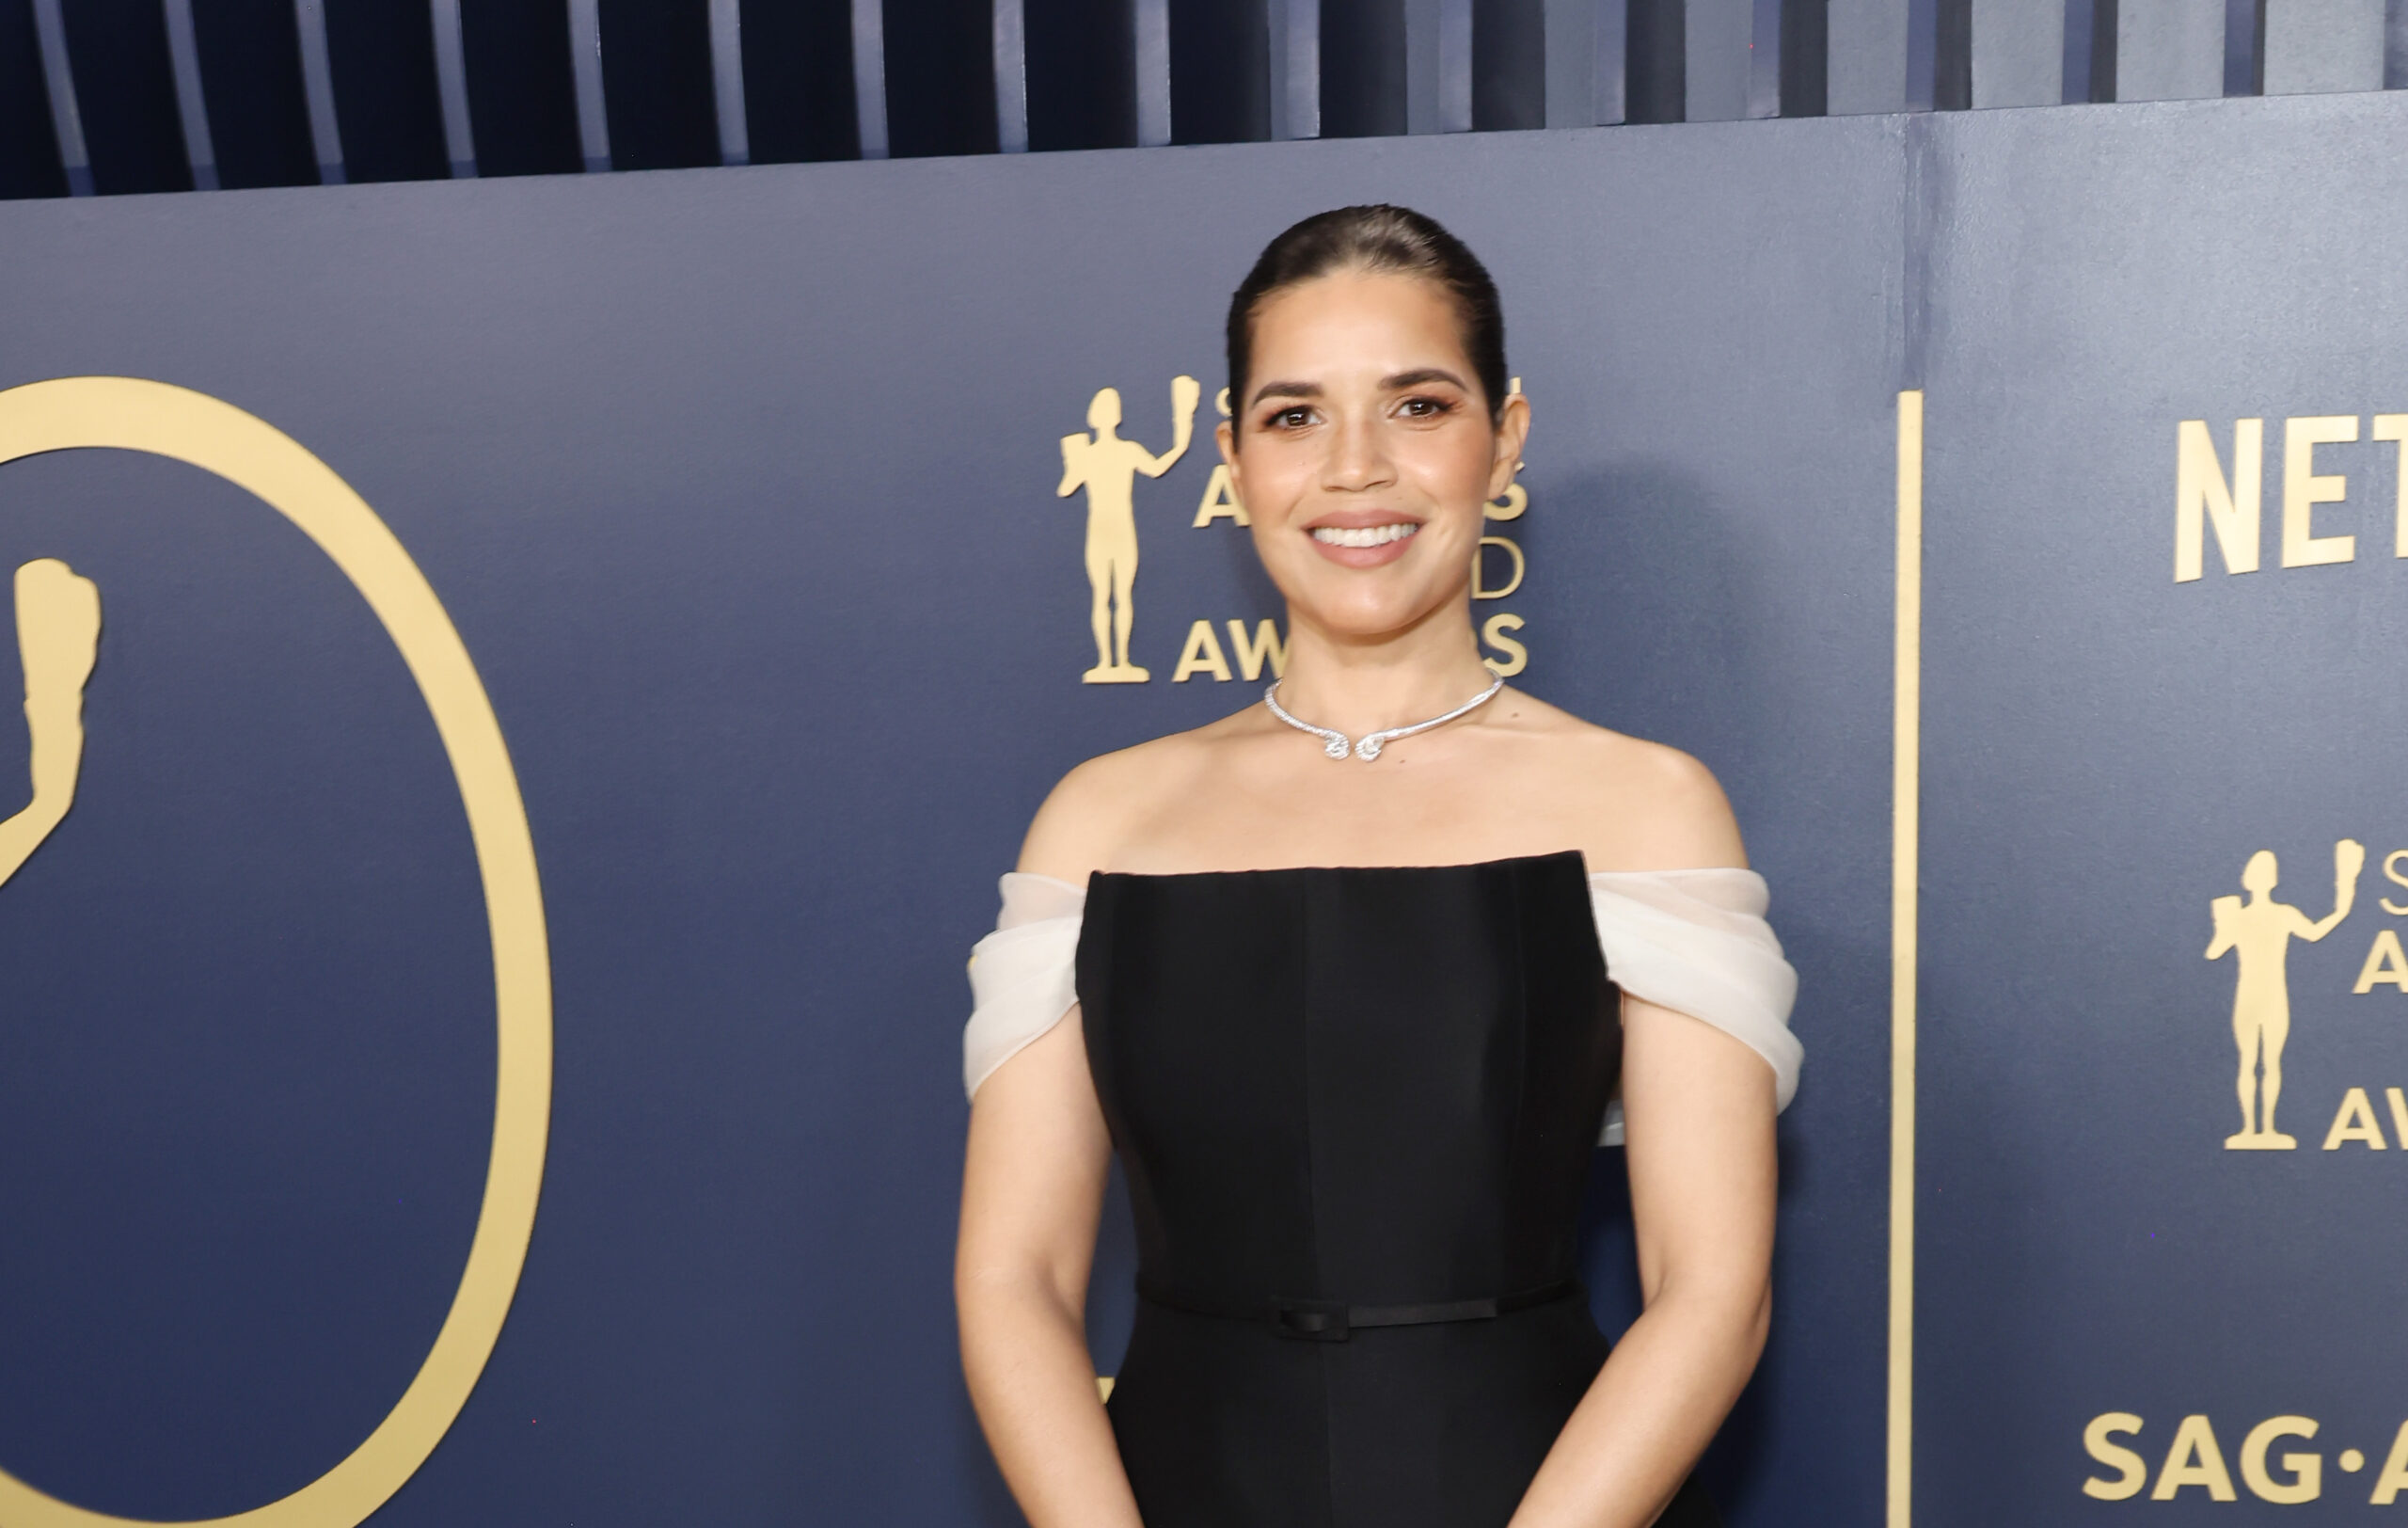 America Ferrera smiling confidently in a black Dior Haute Couture dress at the 30th Annual Screen Actors Guild Awards.